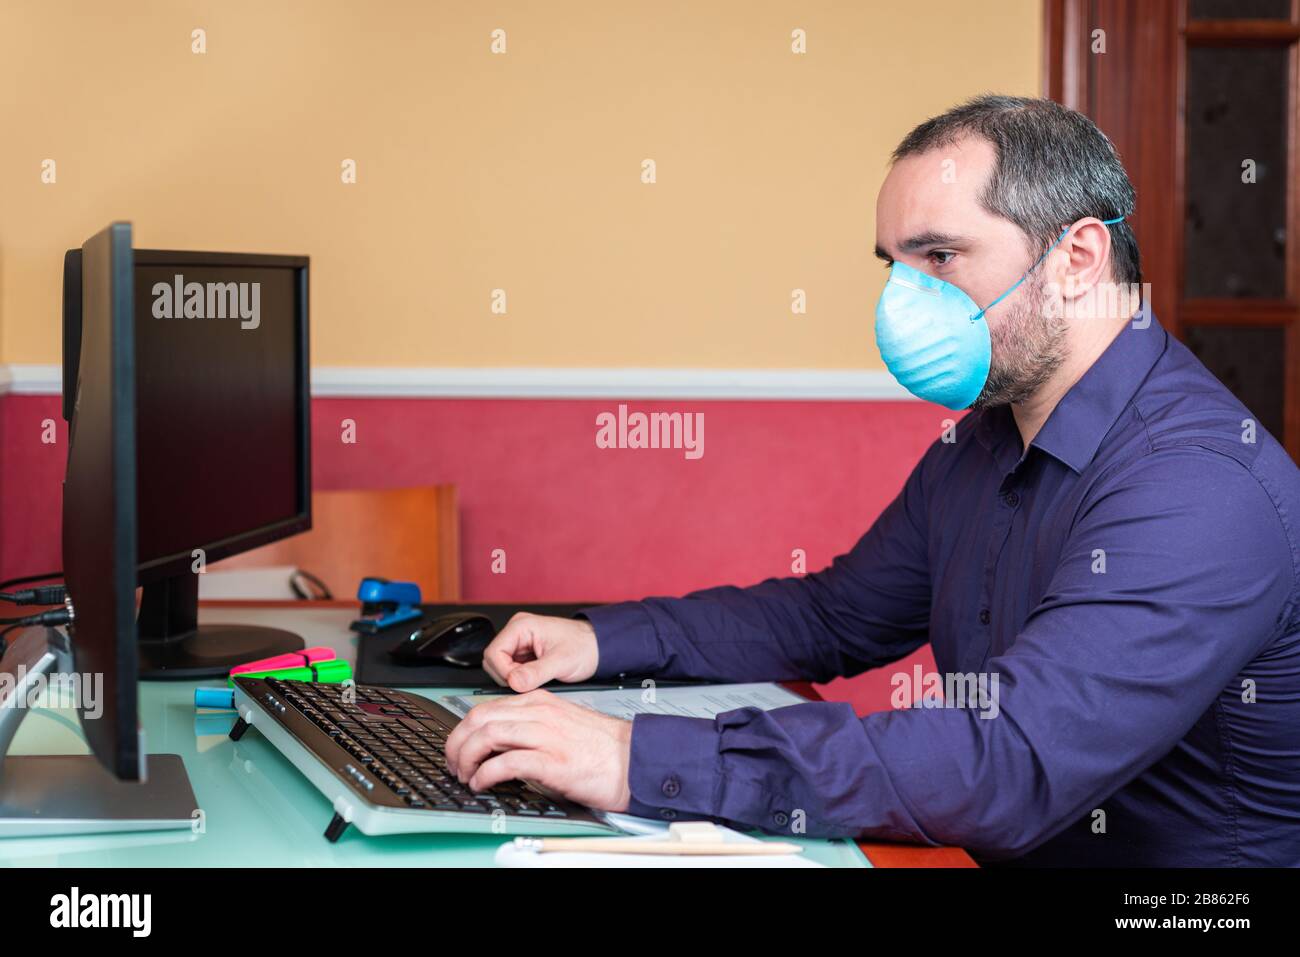 man with medical mask  working in house. Teleworking concept Stock Photo